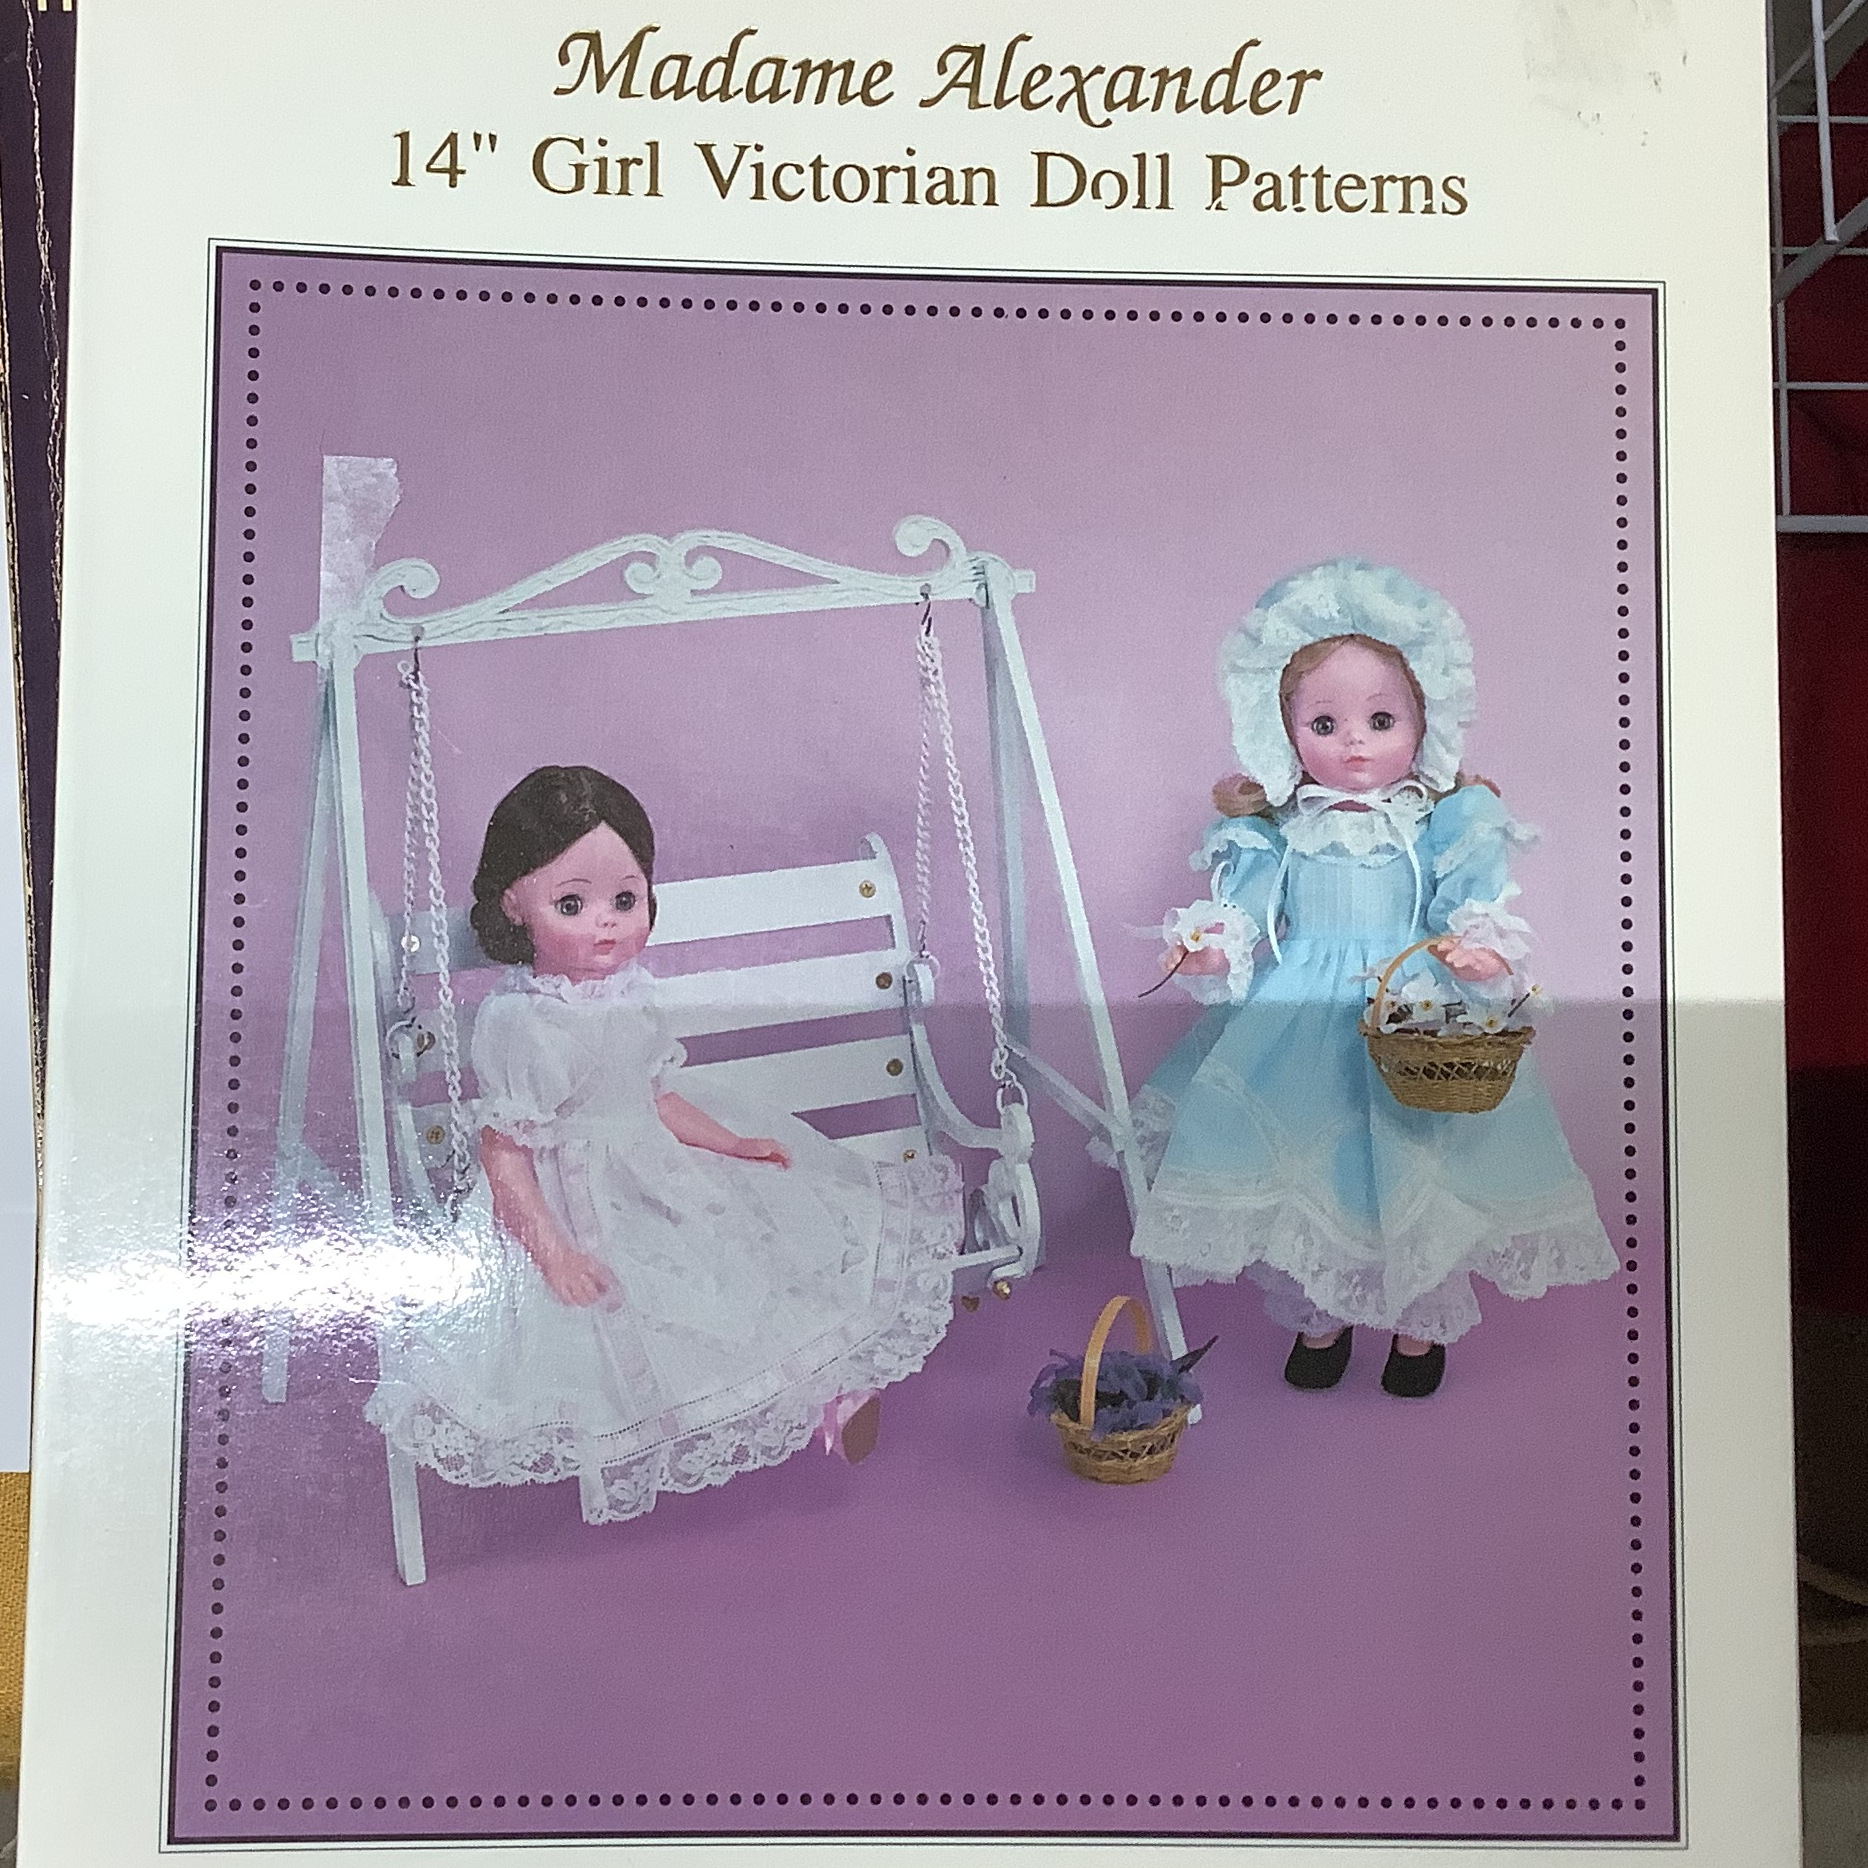 Softcover book depicting two commercially-produced child dolls wearing nostalgic clothing